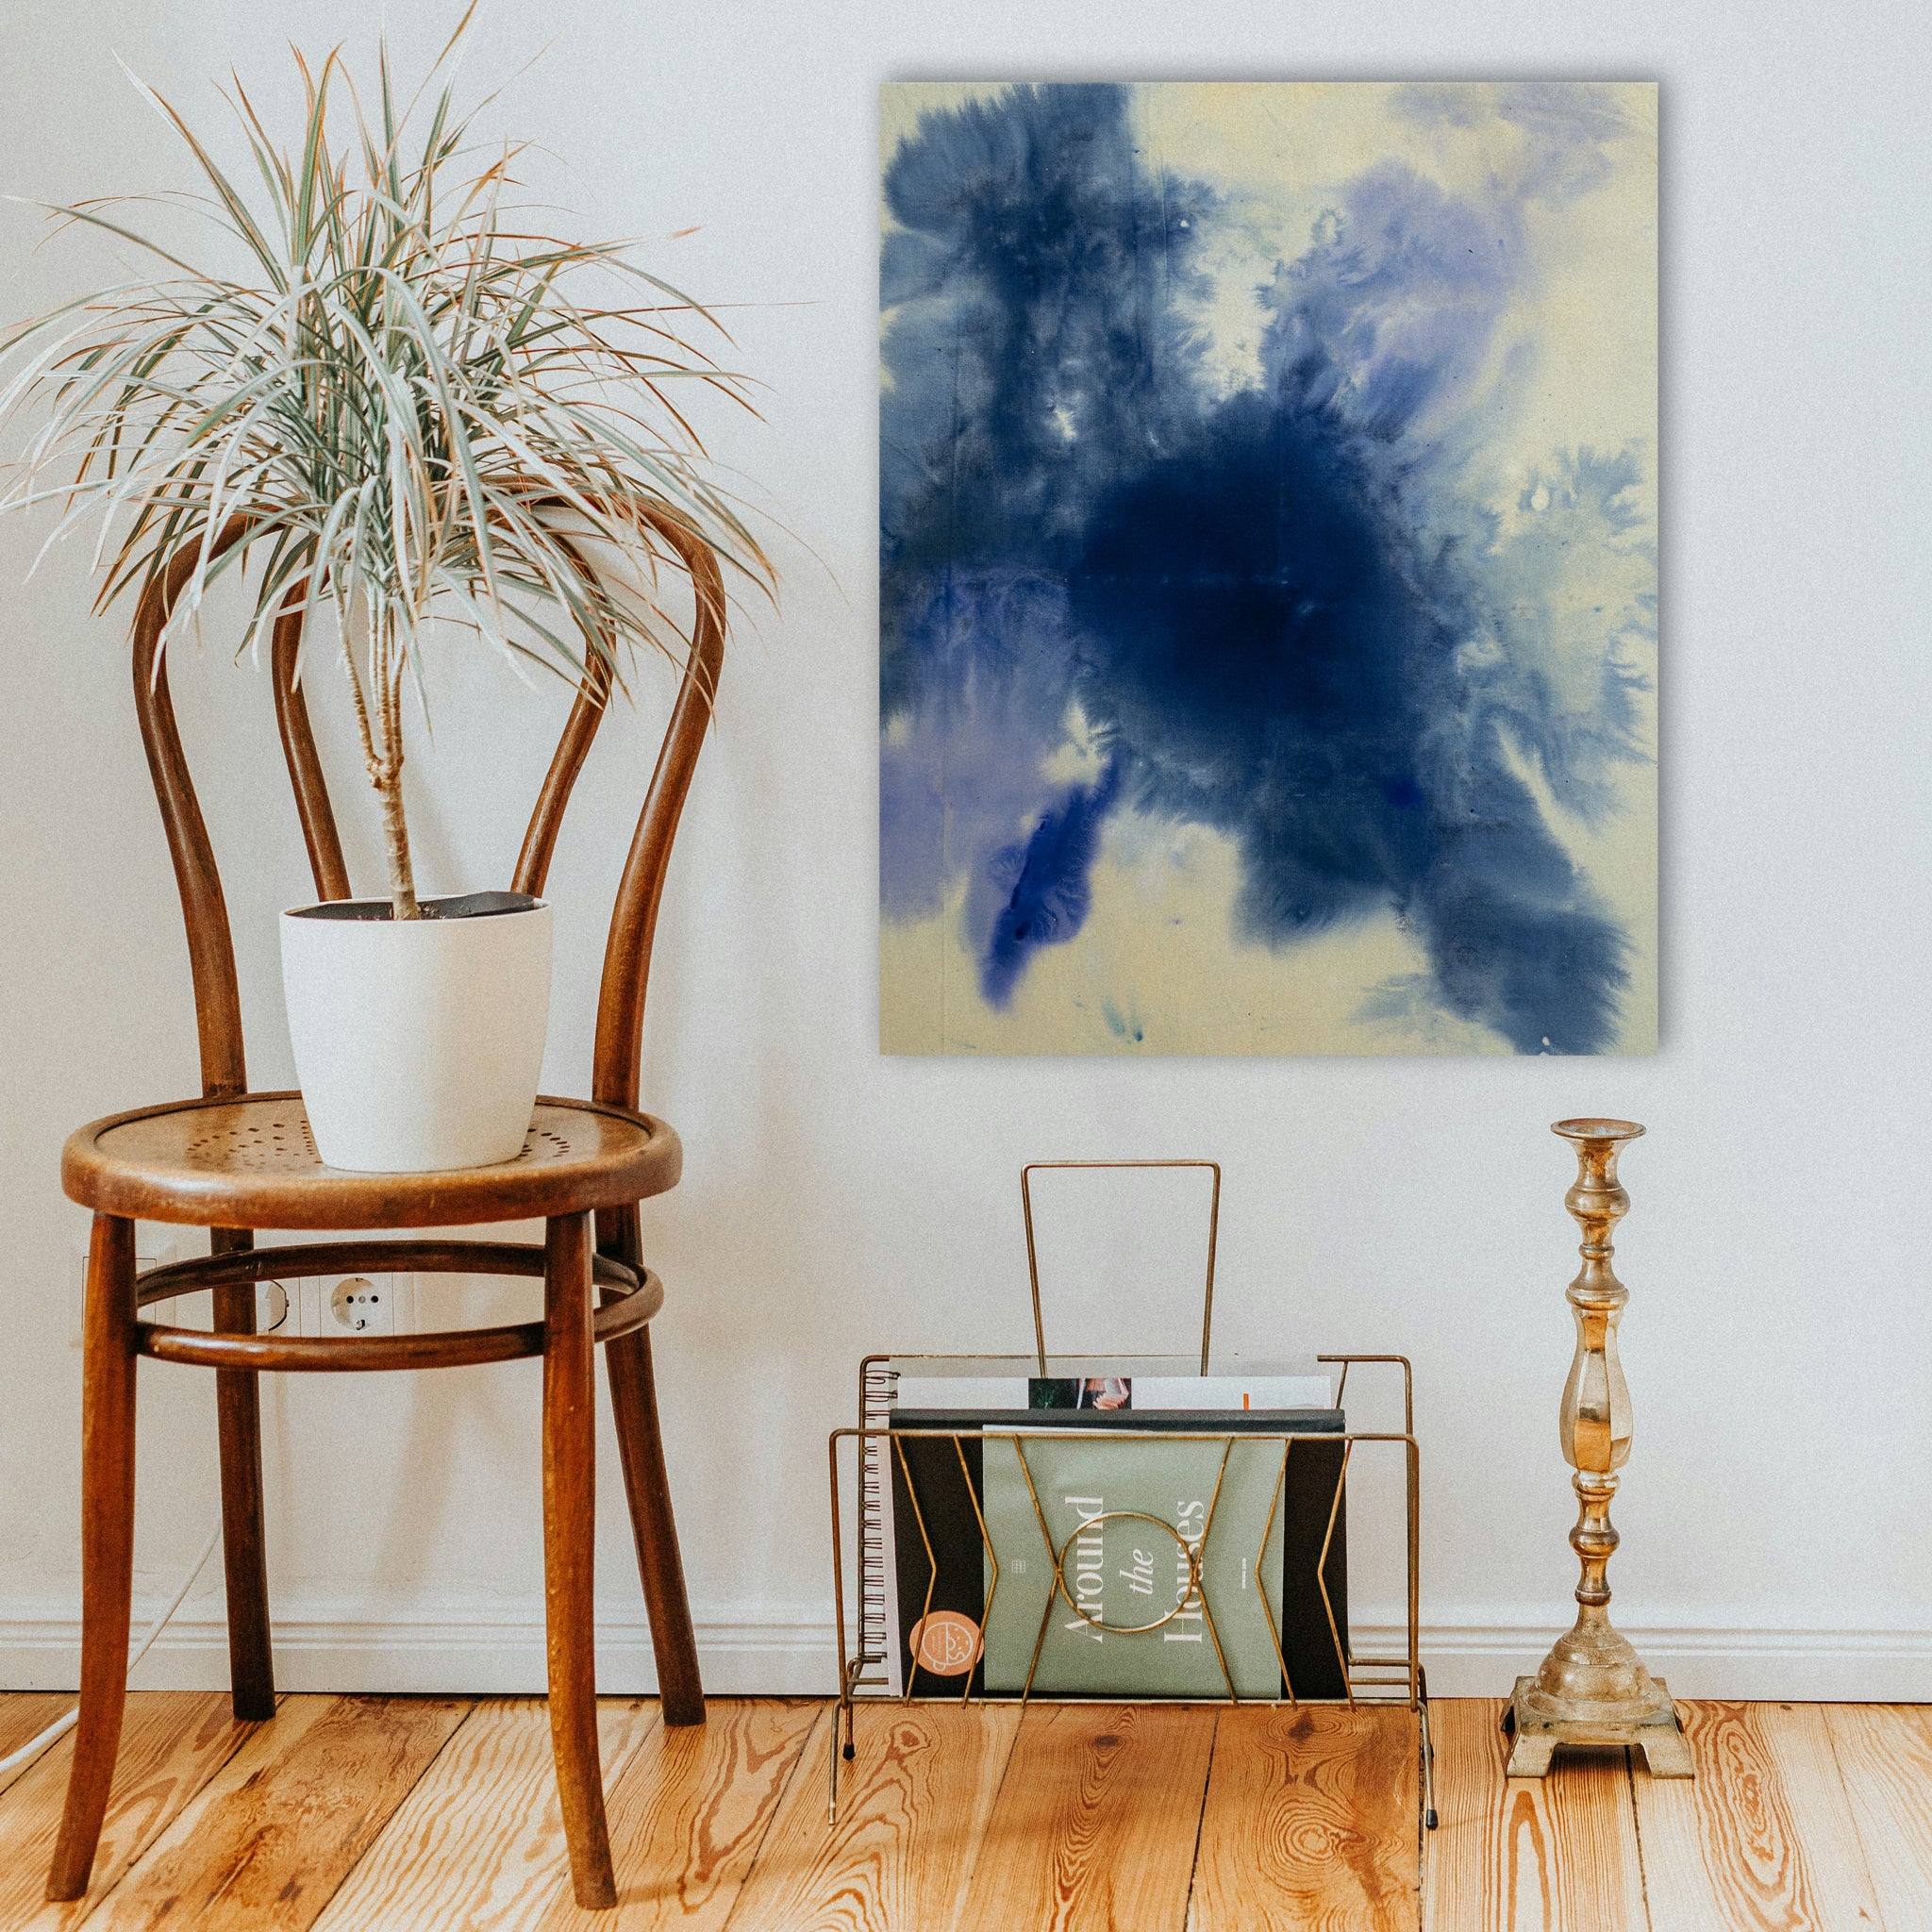 A blue abstract painting on an off-white background hangs above a magazine rack and next to a cafe chair